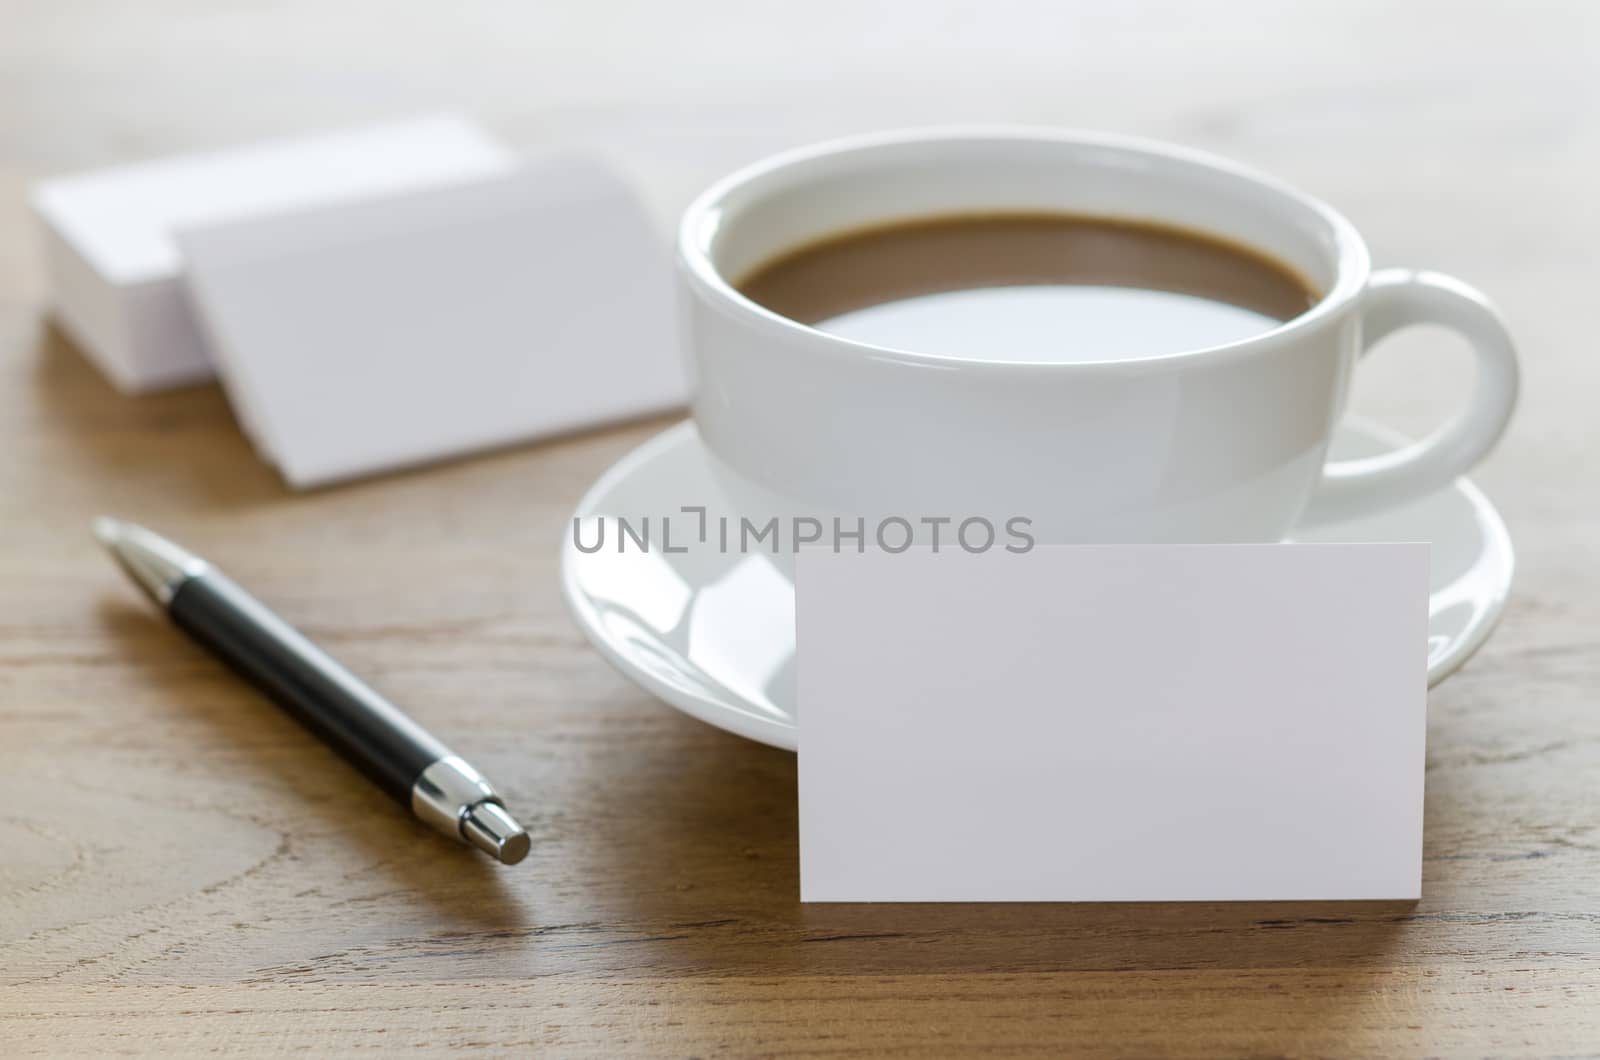 Blank business cards, pen and cup of coffee on wooden table. Corporate stationary branding mock up.